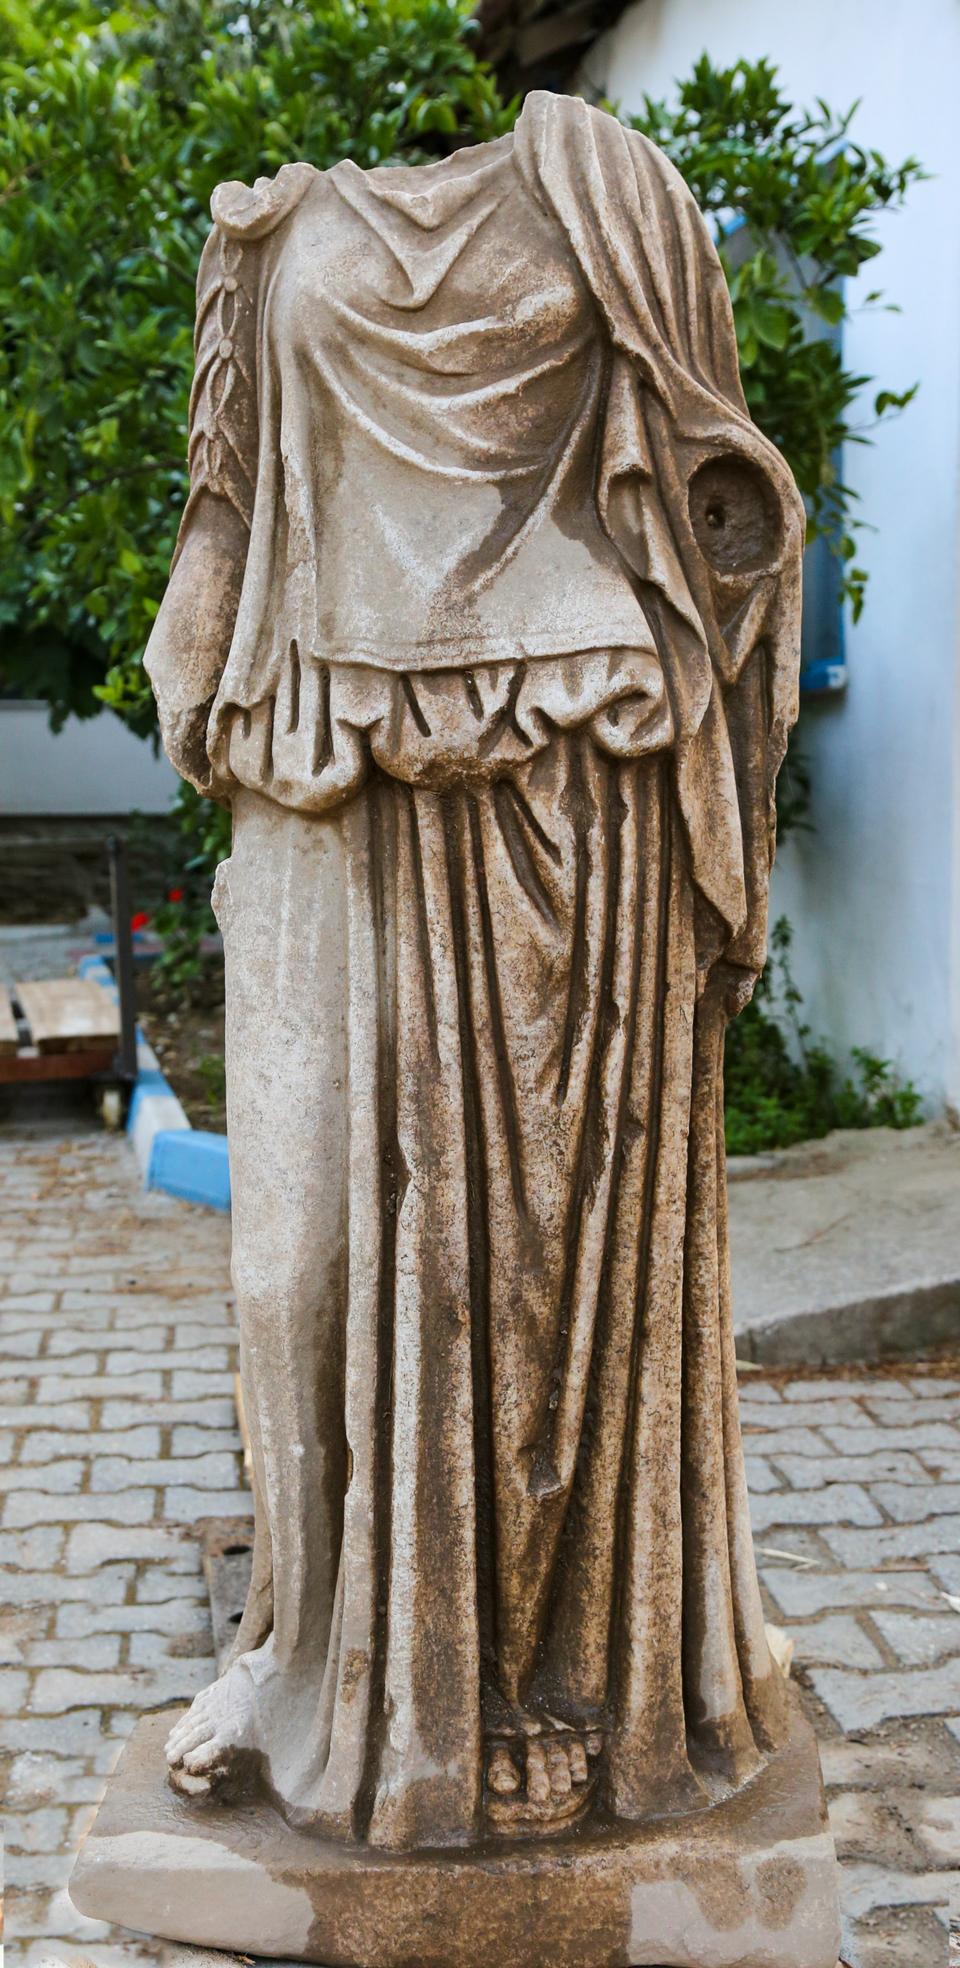 The sculpture of a noblewoman, inspired by a Greek statue sculpted by a famous artist, was the first significant find of the 2021 season in the ancient city of Metropolis.